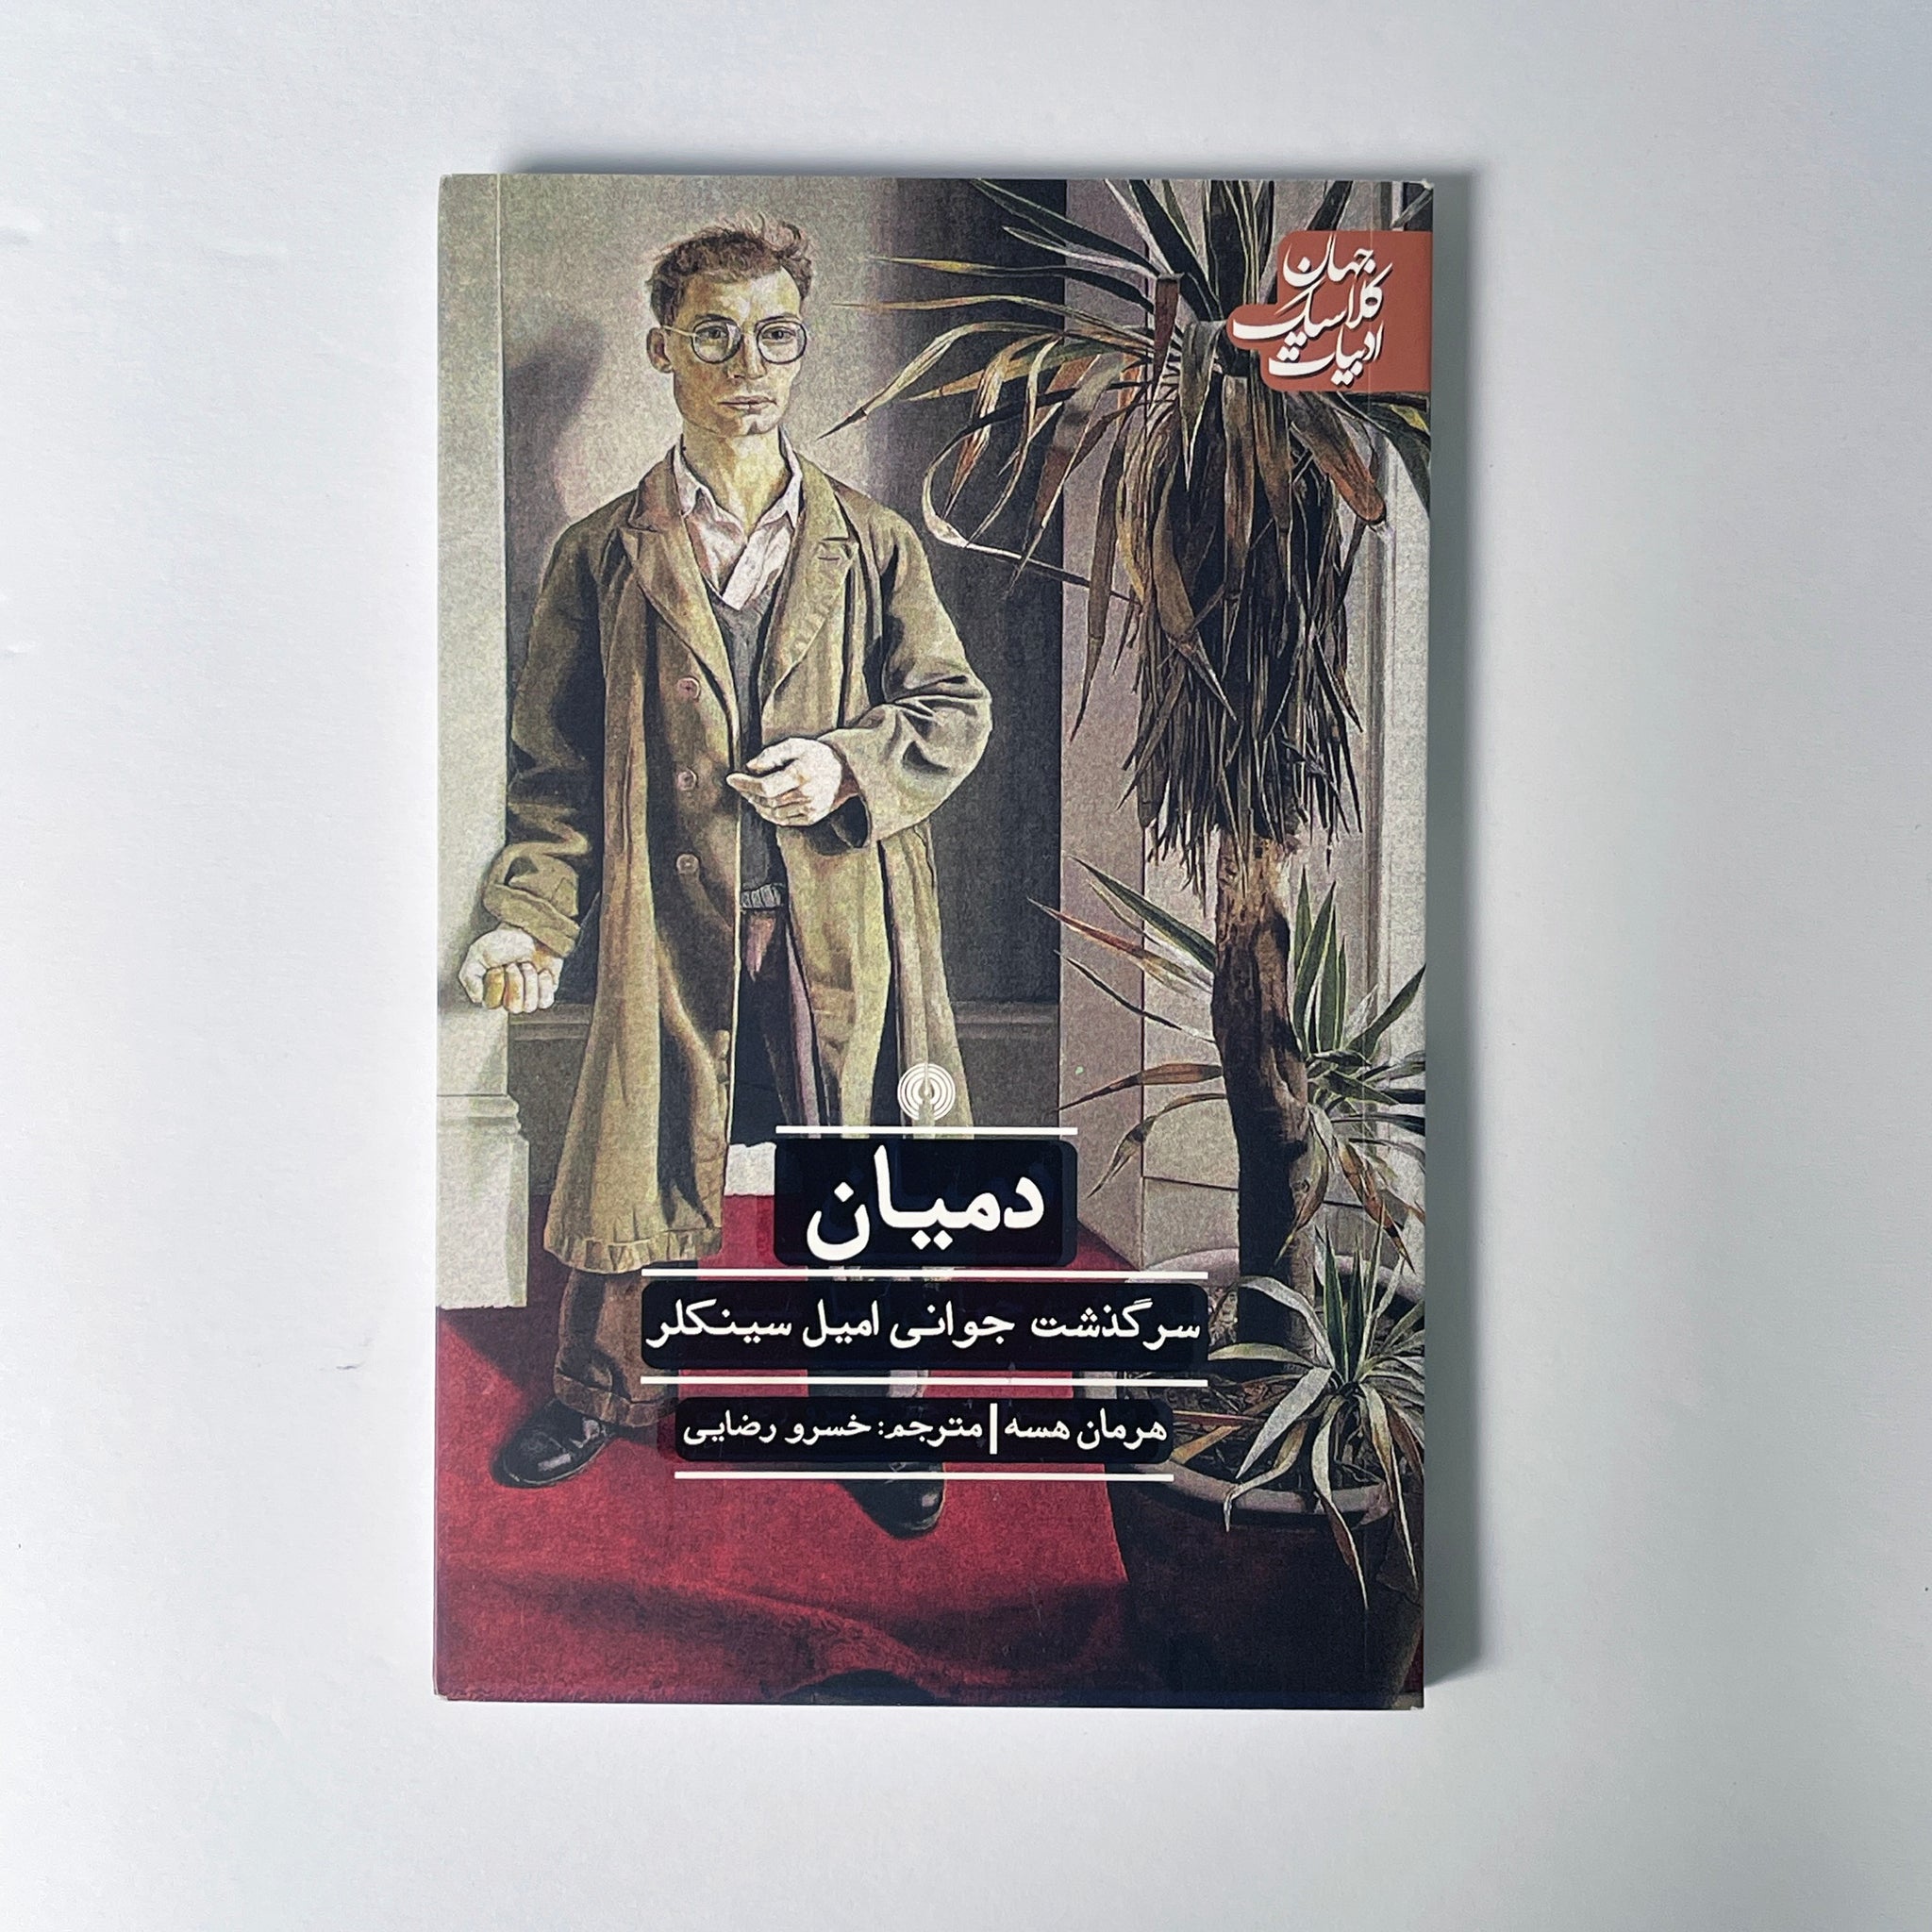 Demian - A Novel By Herman Hese - Classic Literature of the World - Translated to Farsi